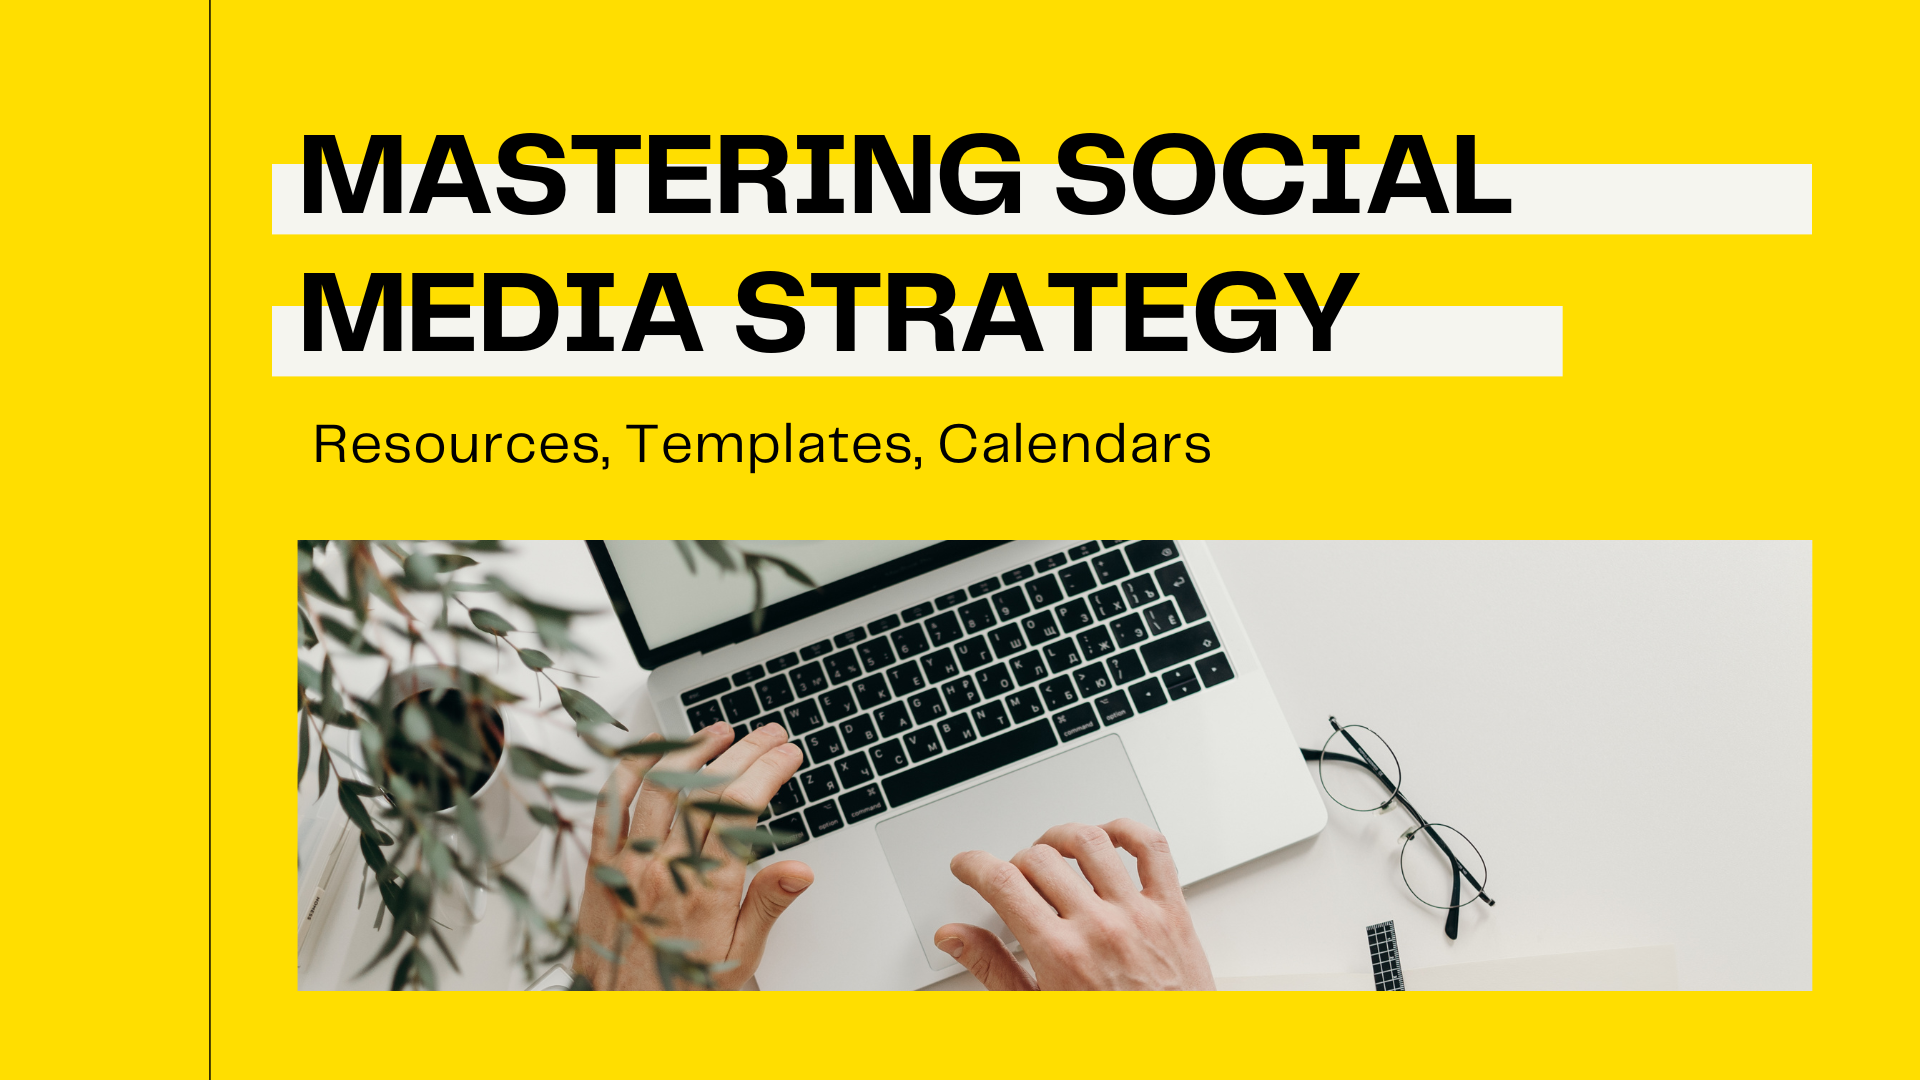 MASTERING SOCIAL MEDIA STRATEGY: Resources, Templates, Calendars